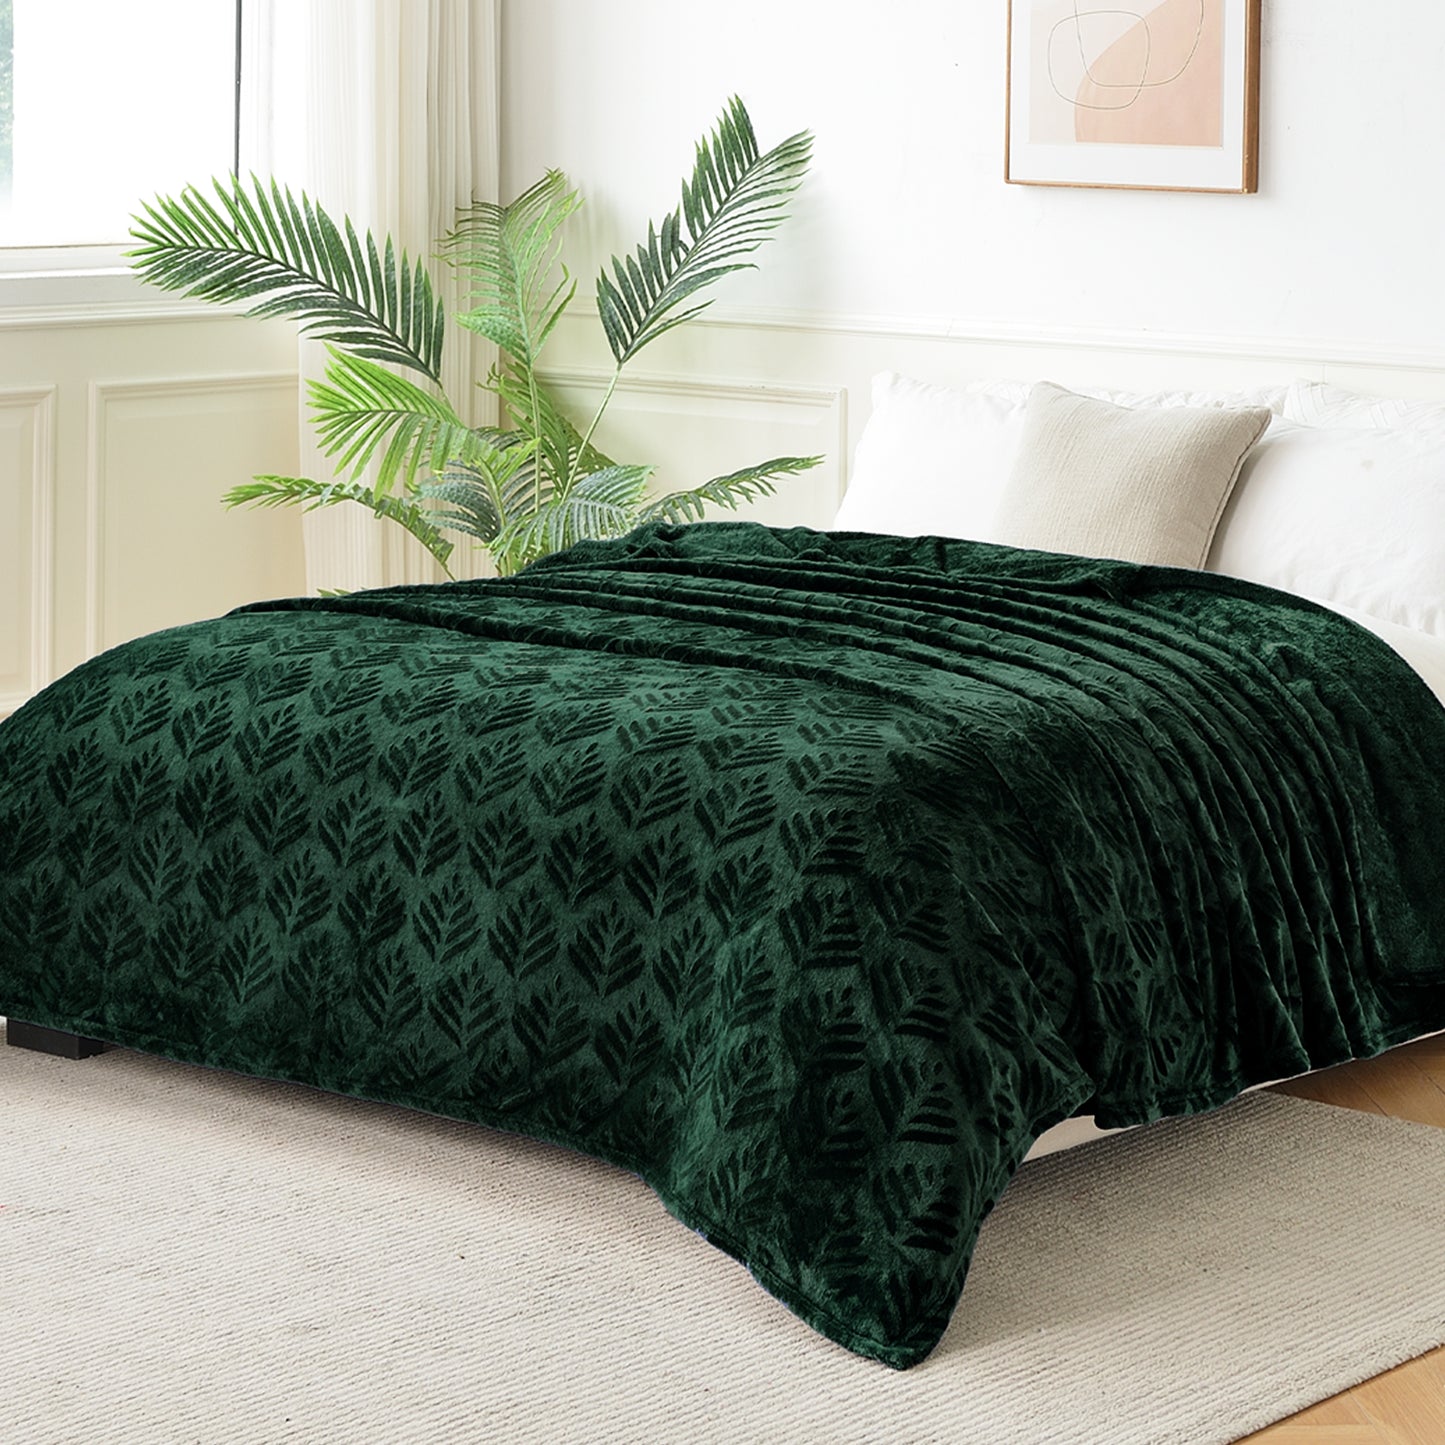 Exclusivo Mezcla Twin size Blanket for Bed, Super Soft and Warm Forest Green Blankets for All Seasons, Flannel Fleece Leaves Pattern Bed Blanket, Plush Fuzzy and Thick, 60x80 Inch